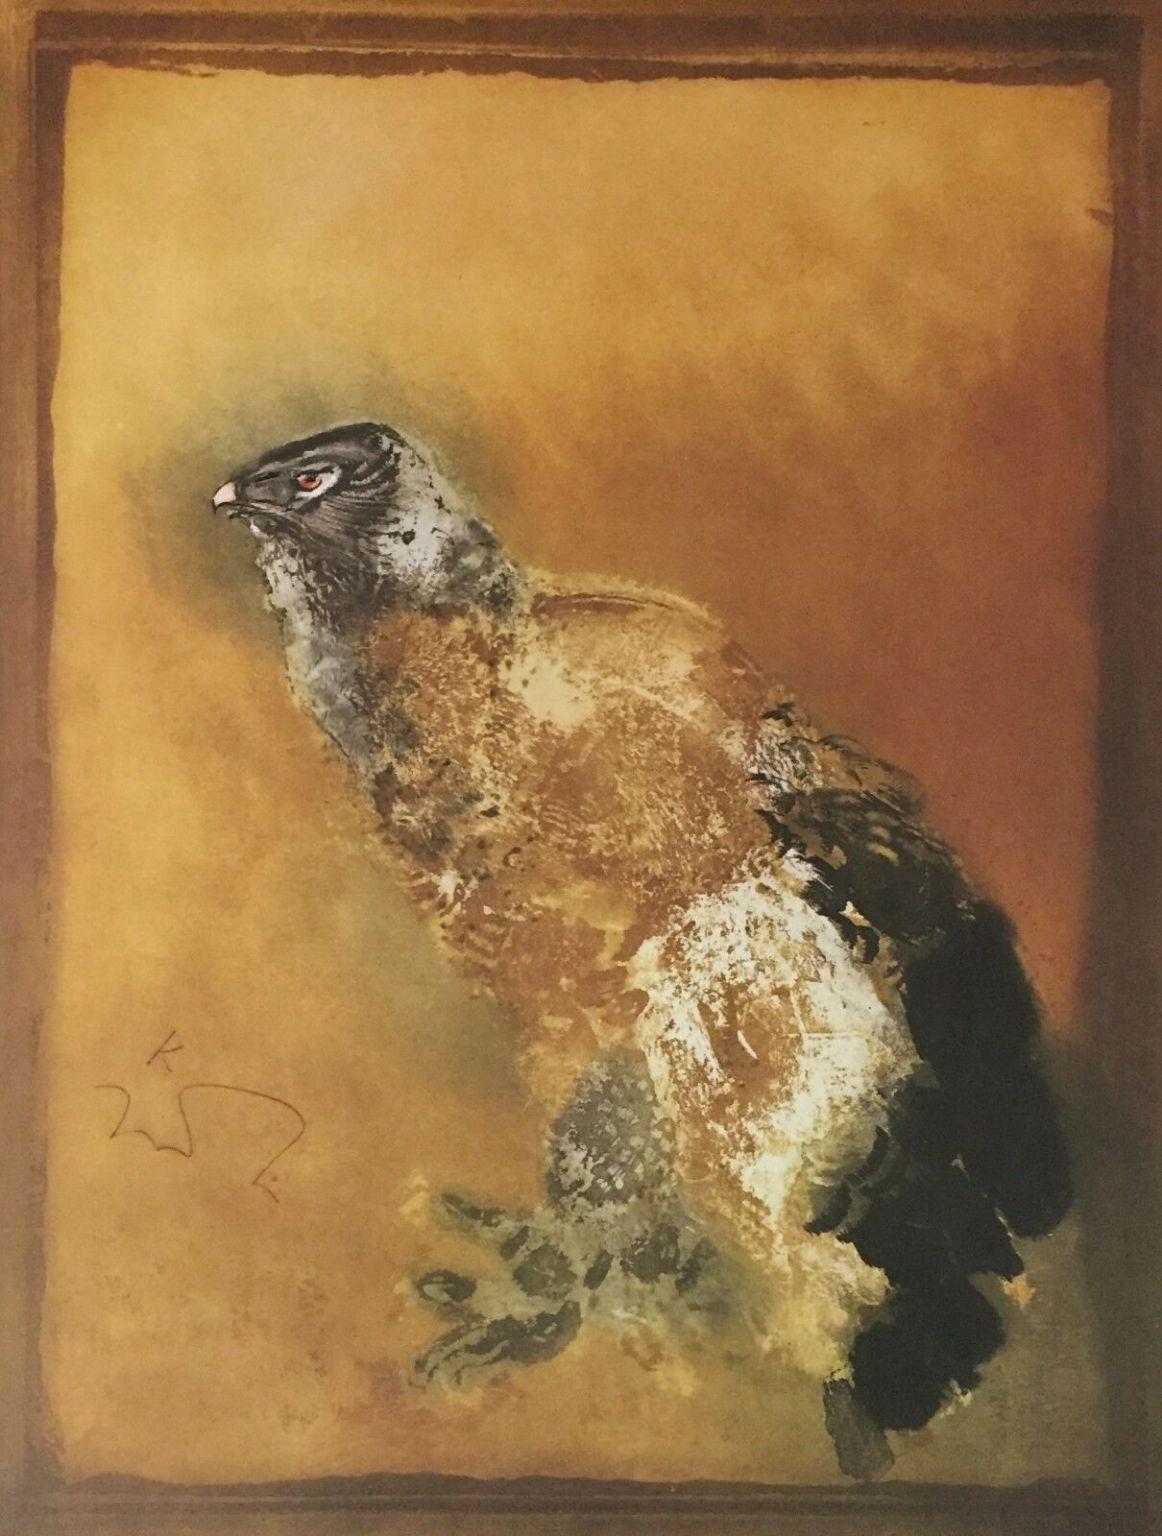 KAIKO MOTI (1921-1989) Kaiko Moti's art is more contemplative than descriptive as he endeavors to analyze his sensations before nature in order to recreate its essence. This quest underlies each one of Moti's works, which makes the illusory